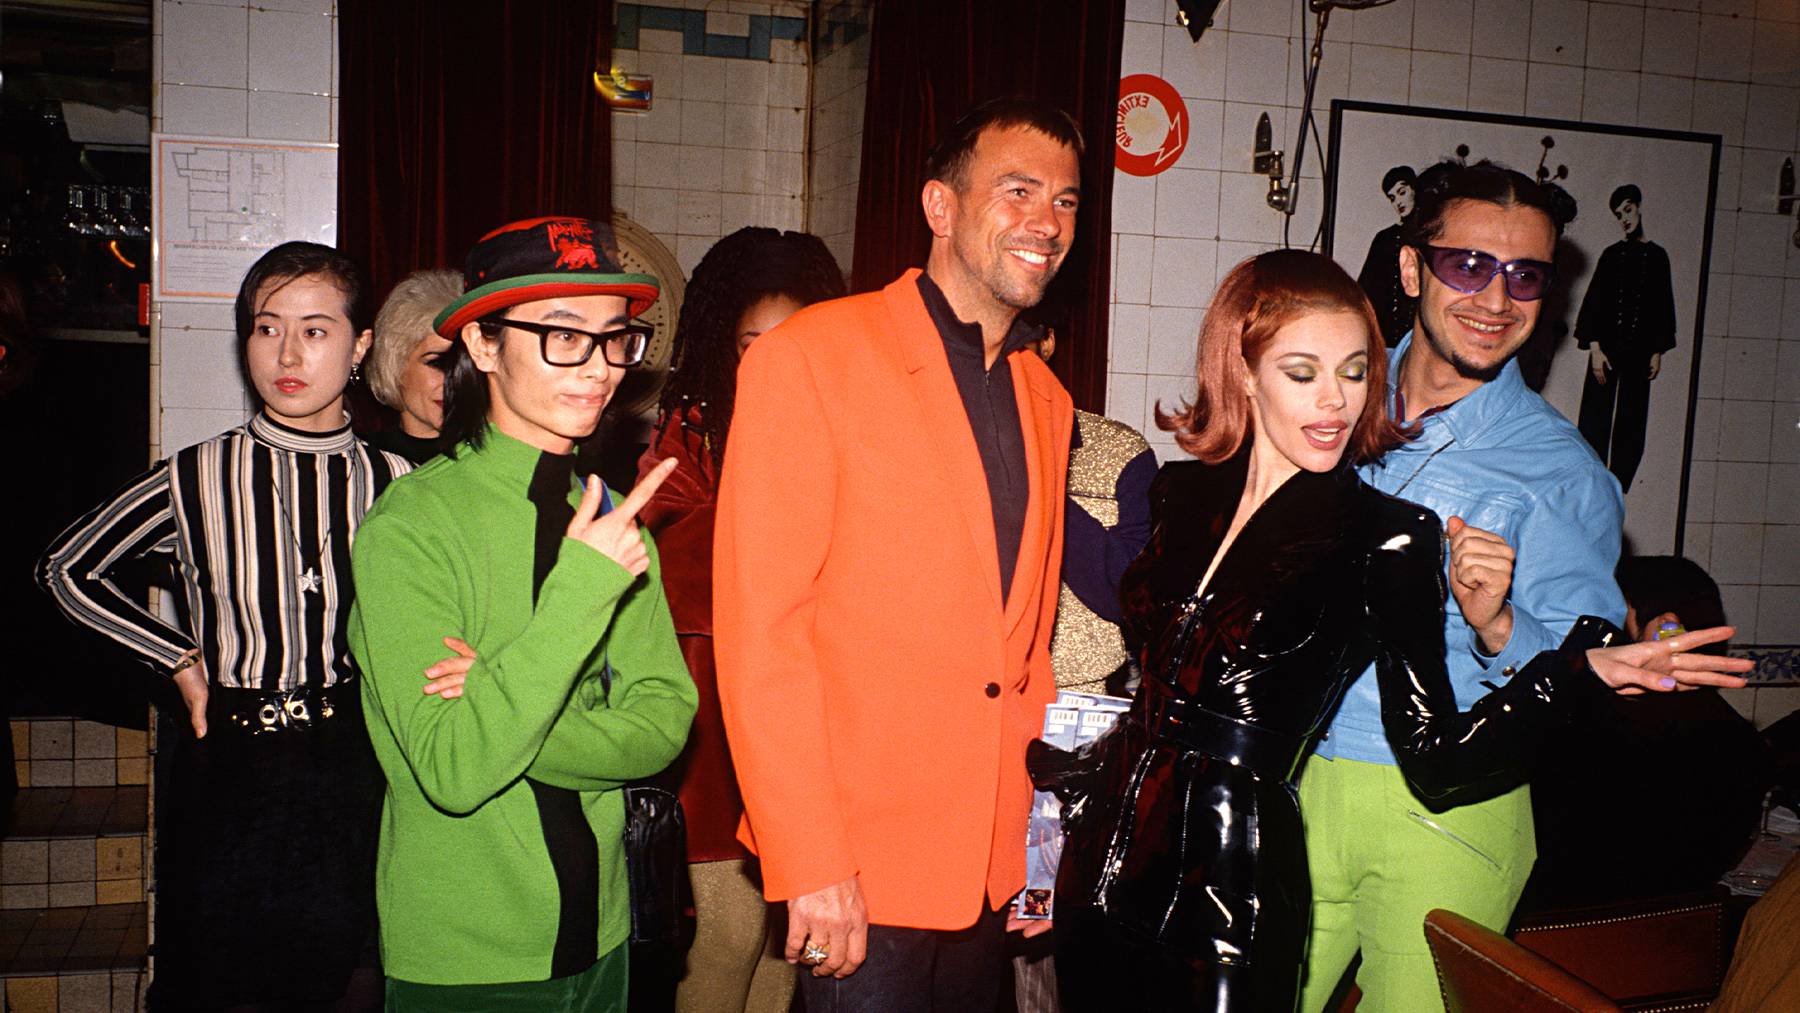 Thierry Mugler attending a fashion week party in the 1980s in Paris, France.